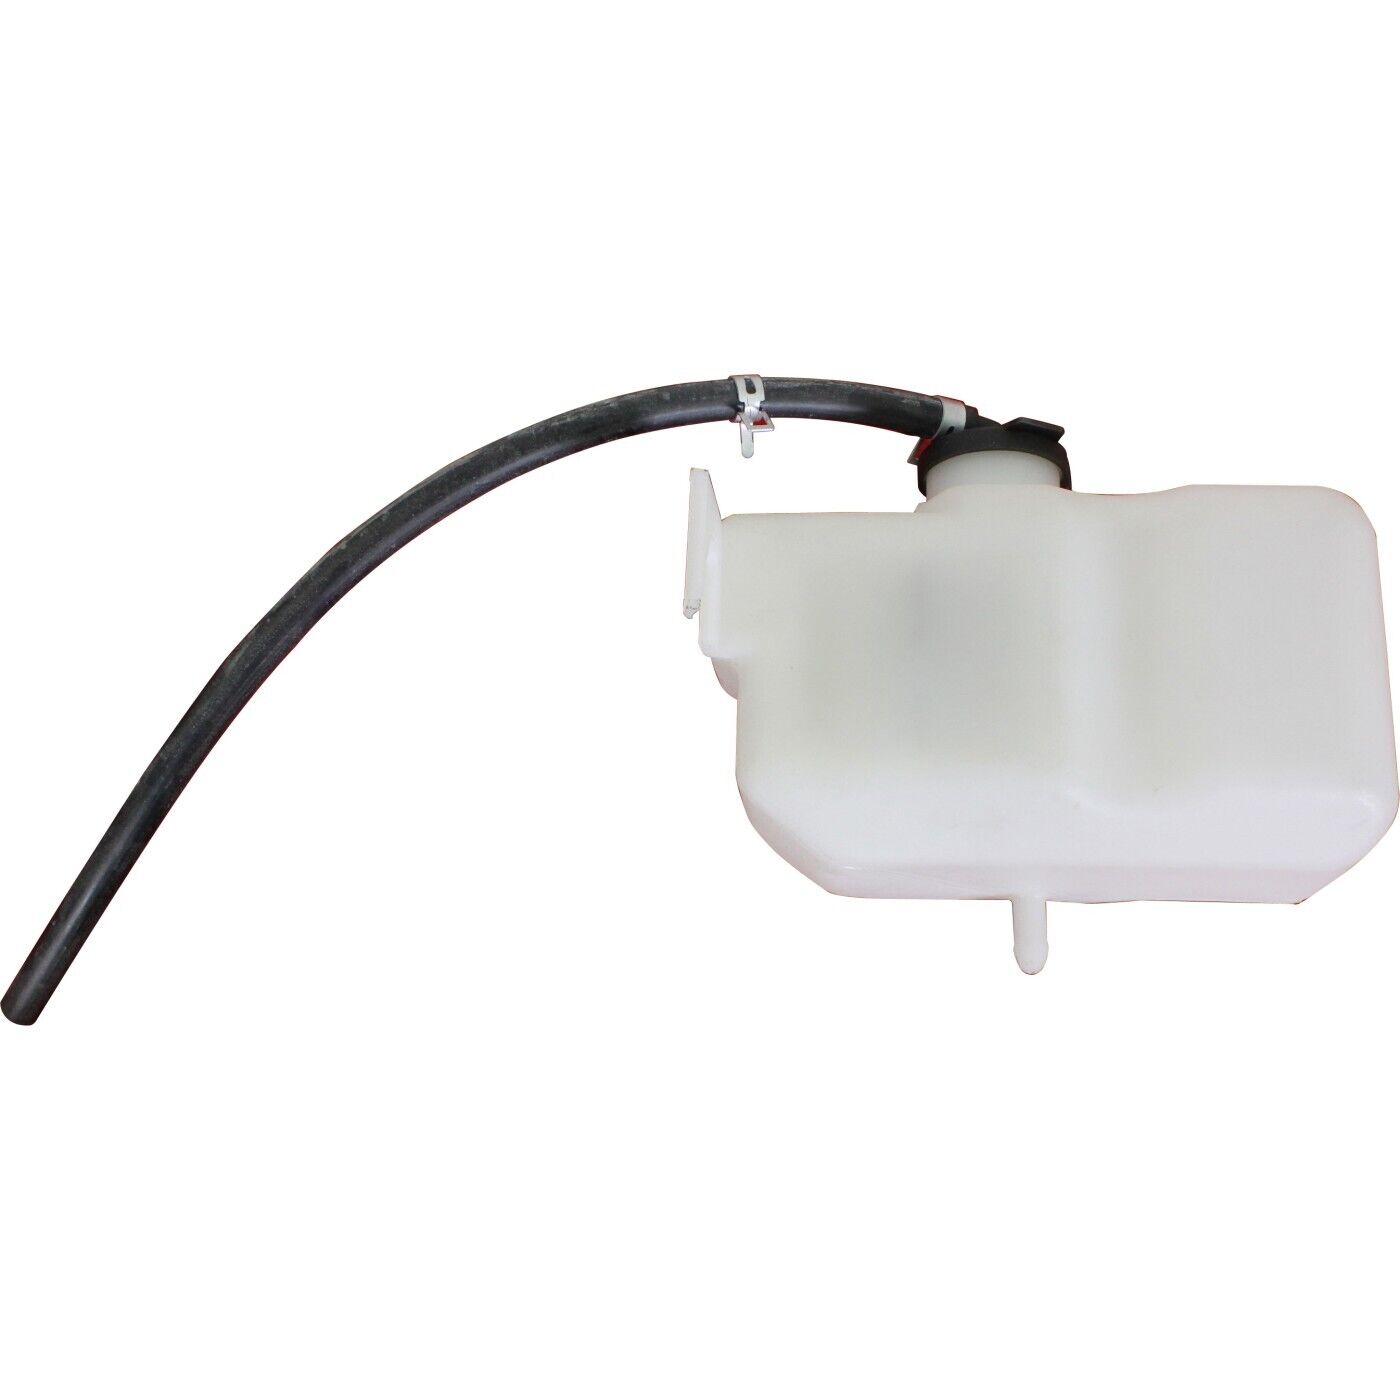 Radiator Coolant Overflow Expansion Tank Bottle for 97-01 Toyota Camry ES300